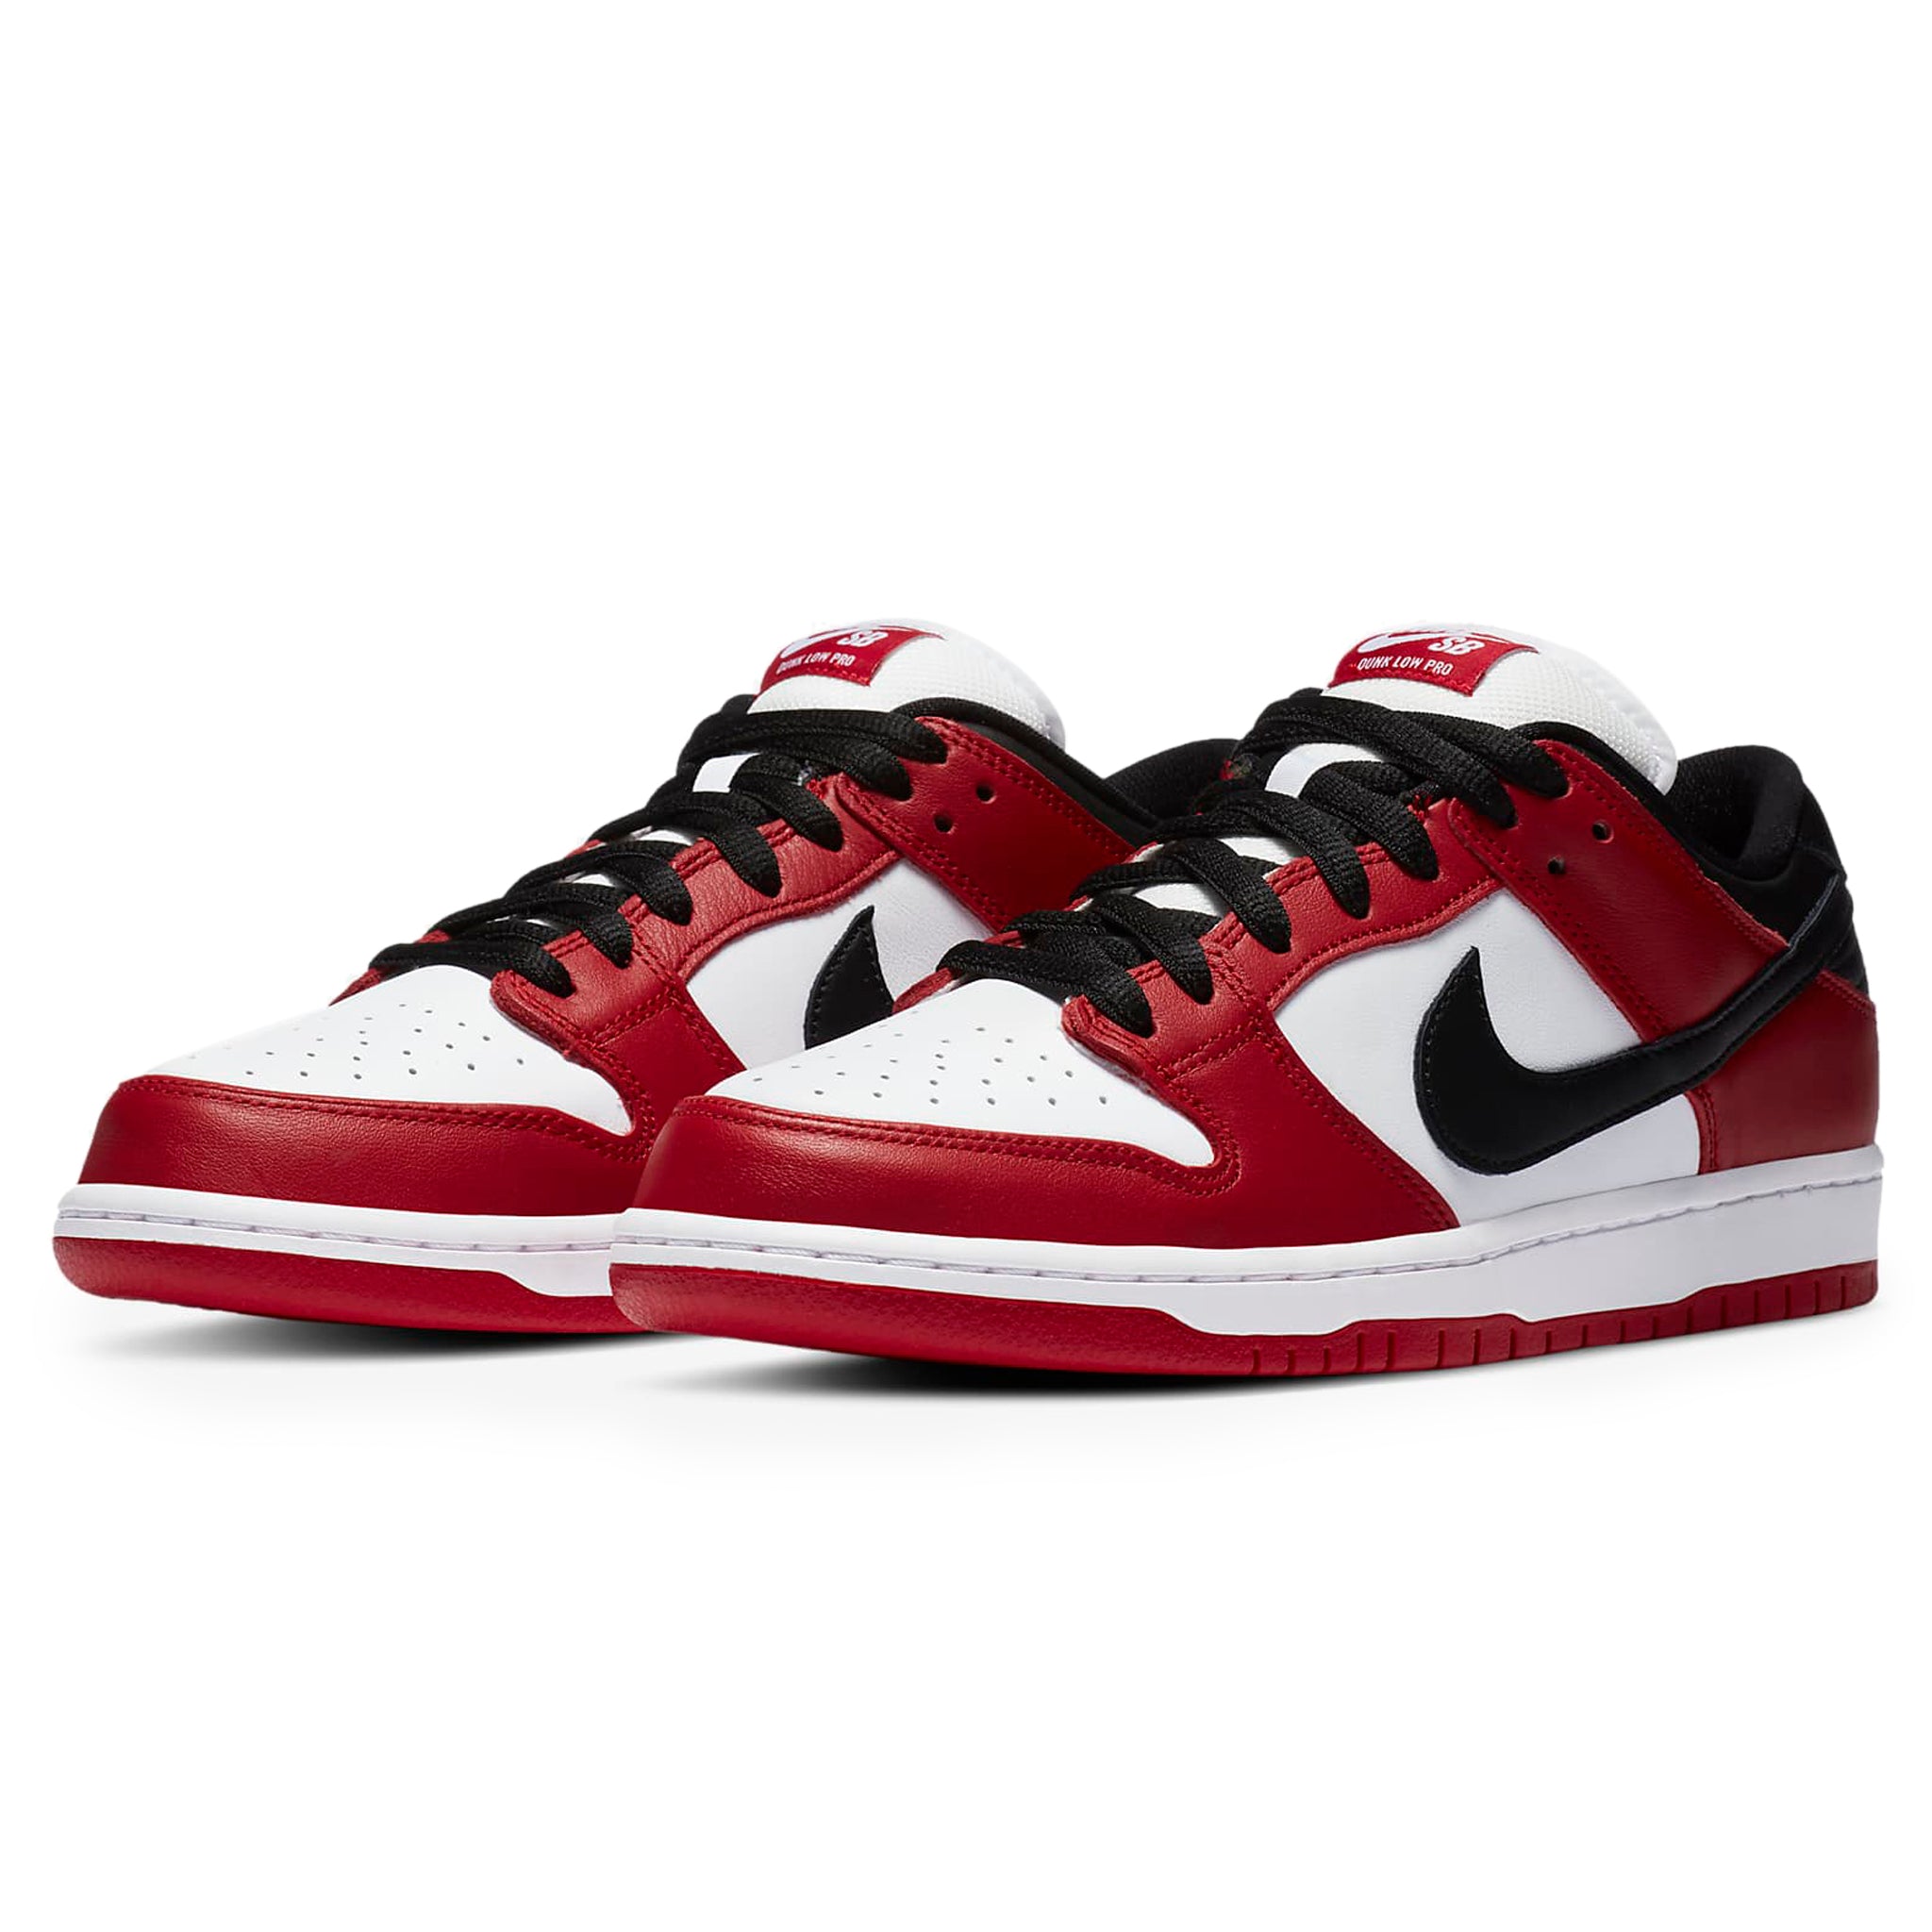 Front side view of Nike SB Dunk Low J-Pack Chicago BQ6817-600